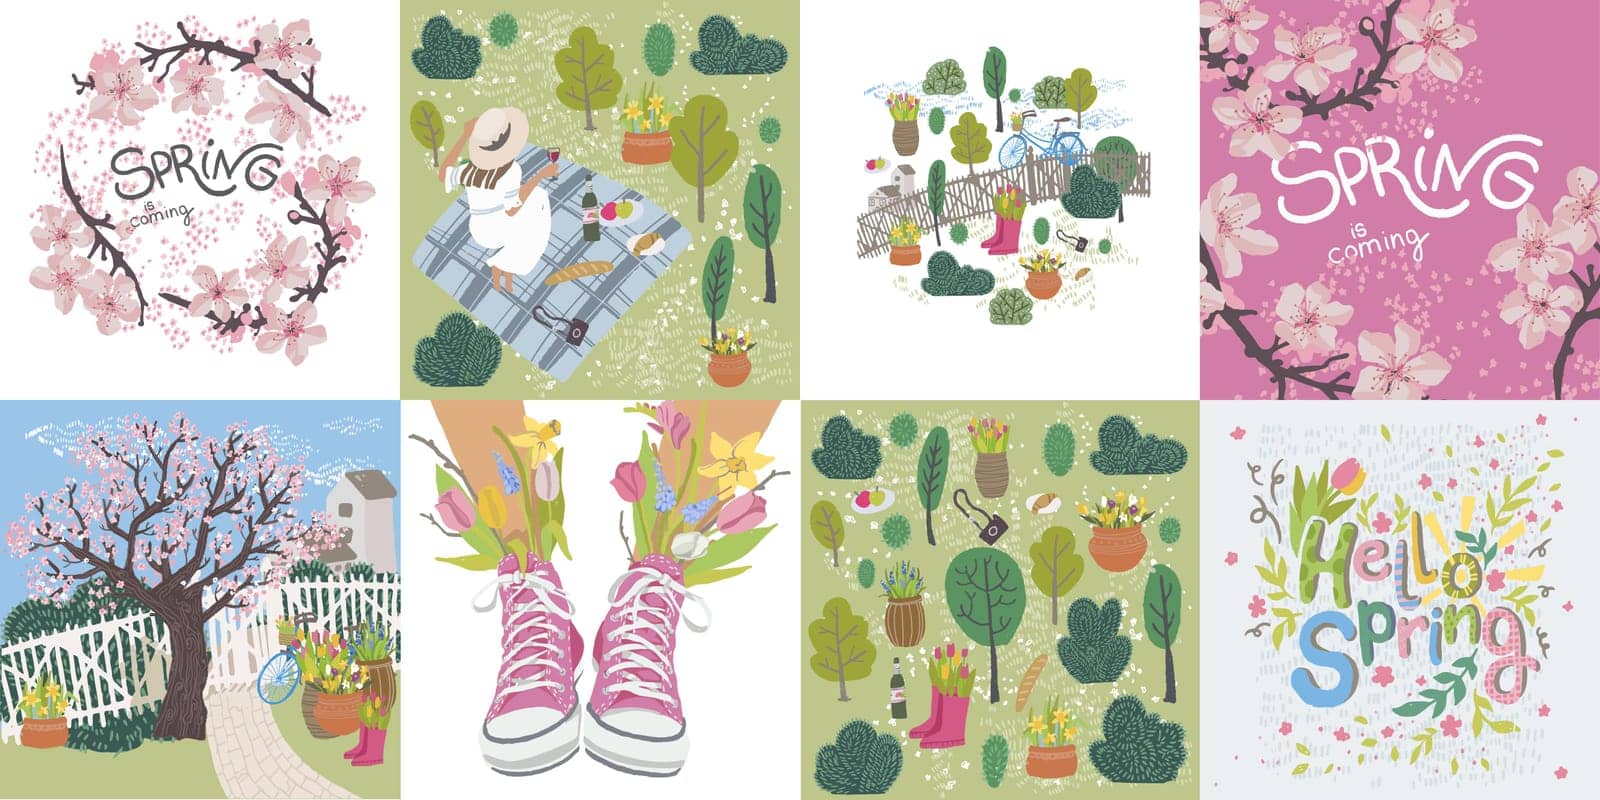 Flourishing of flowers and plants, blossom and blooming of march. Spring season and revival of nature. Yards and gardens with trees and bushes with lush foliage and leafage. Vector in flat style